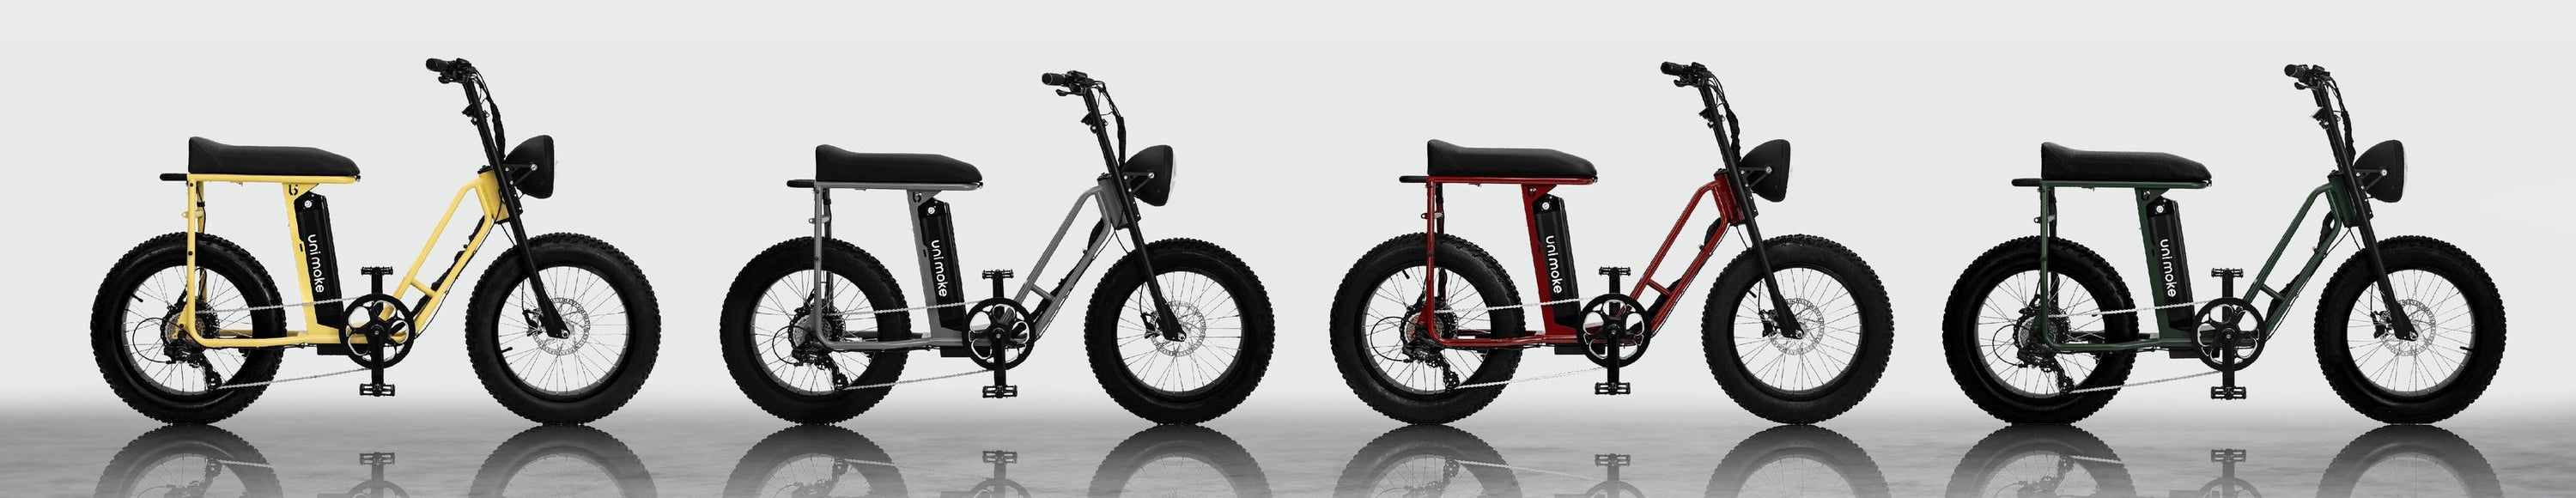 UD Bike lineup, cool electric urban bikes with fat tires